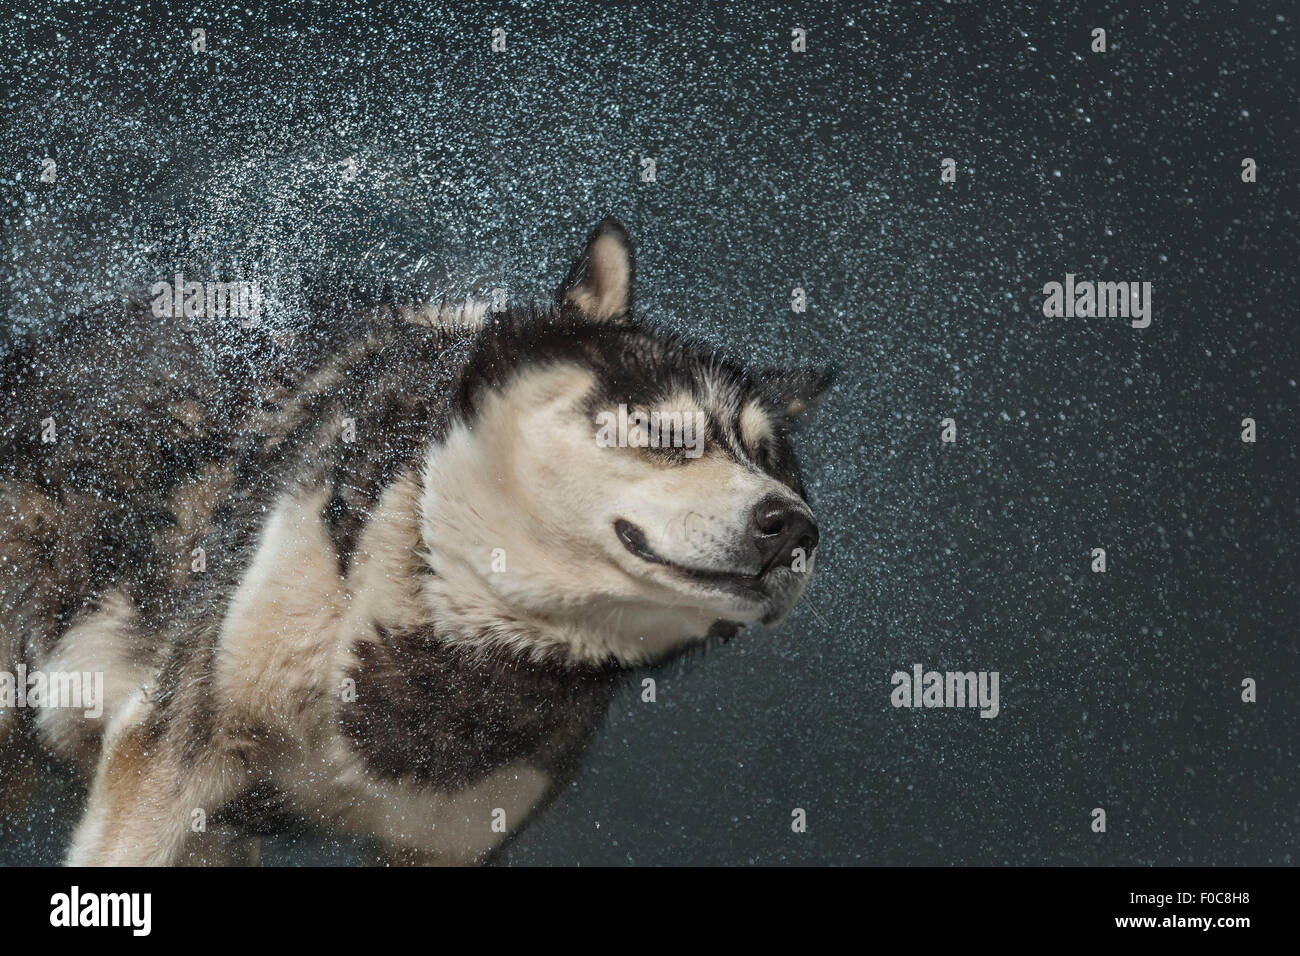 Siberian Husky shaking off water over gray background Stock Photo